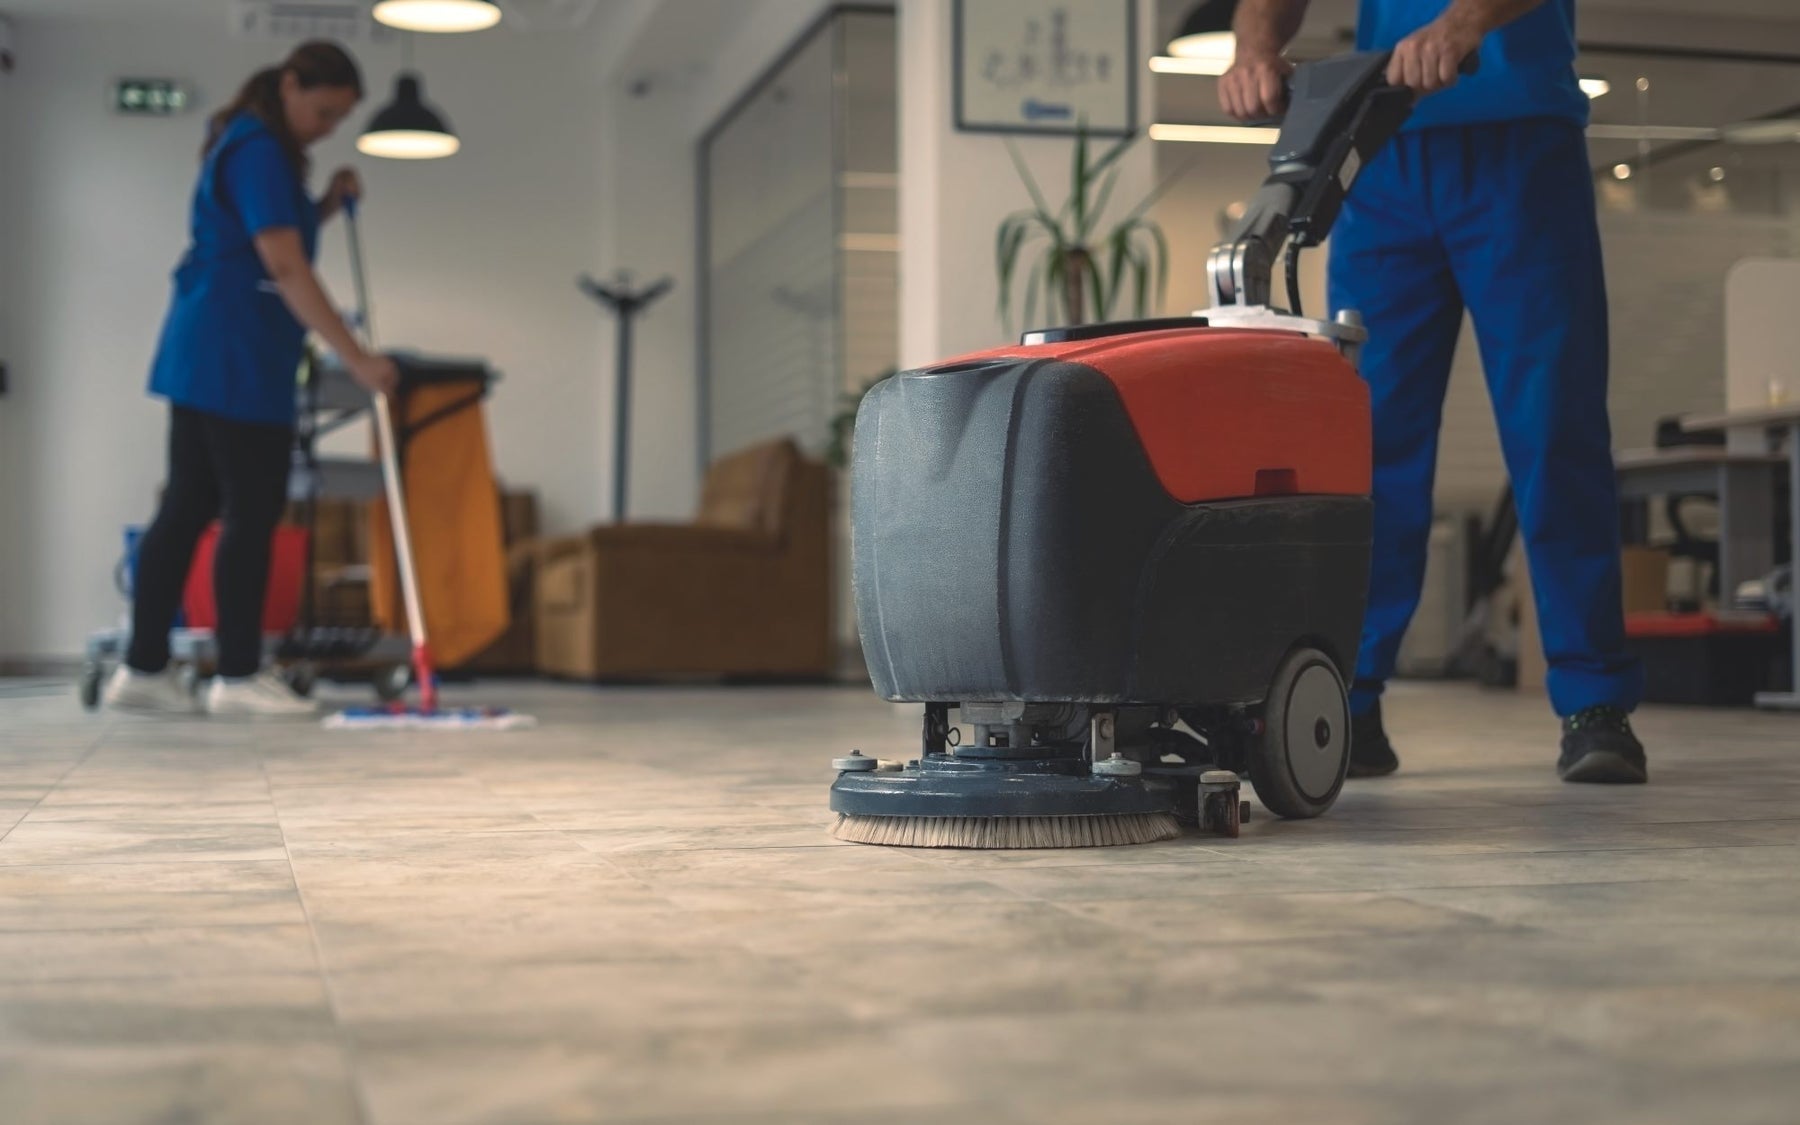 The Latest Trends in Commercial Cleaning Equipment: What Business Owners Should Know